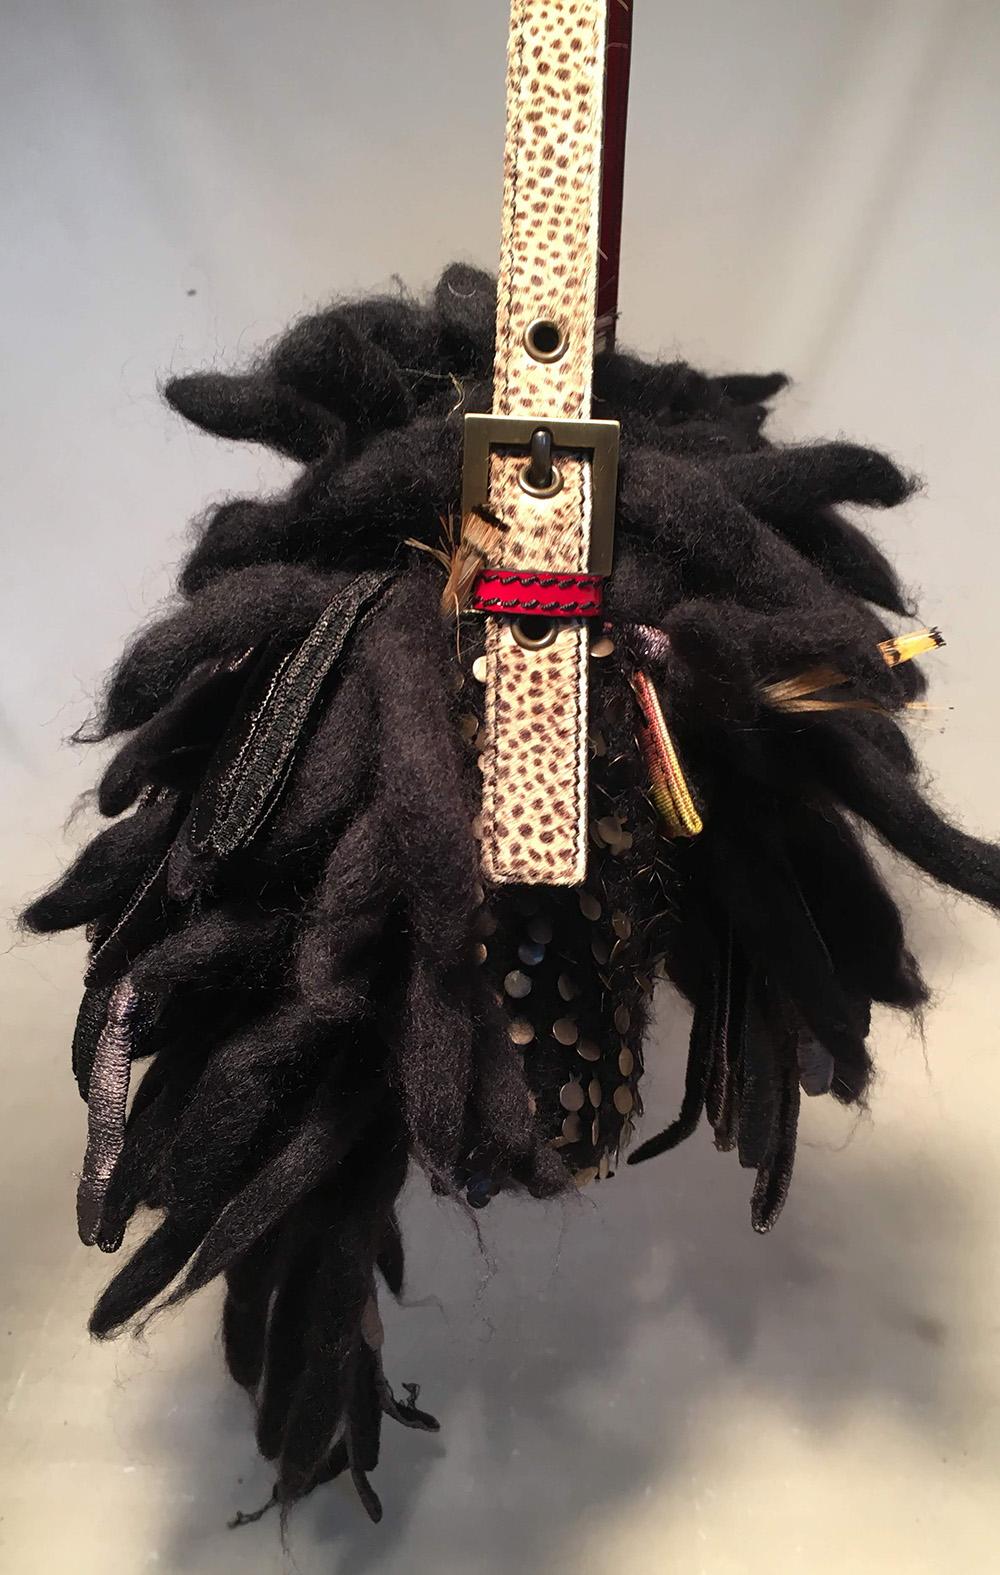 Limited Edition Fendi for Neiman Marcus Dreadlock Bird Baguette in excellent condition. To commemorate Neimans 100 year anniversary, Fendi produced 44 of these limited edition pieces. Each piece was handmade by the Fendi craftsmans and features a